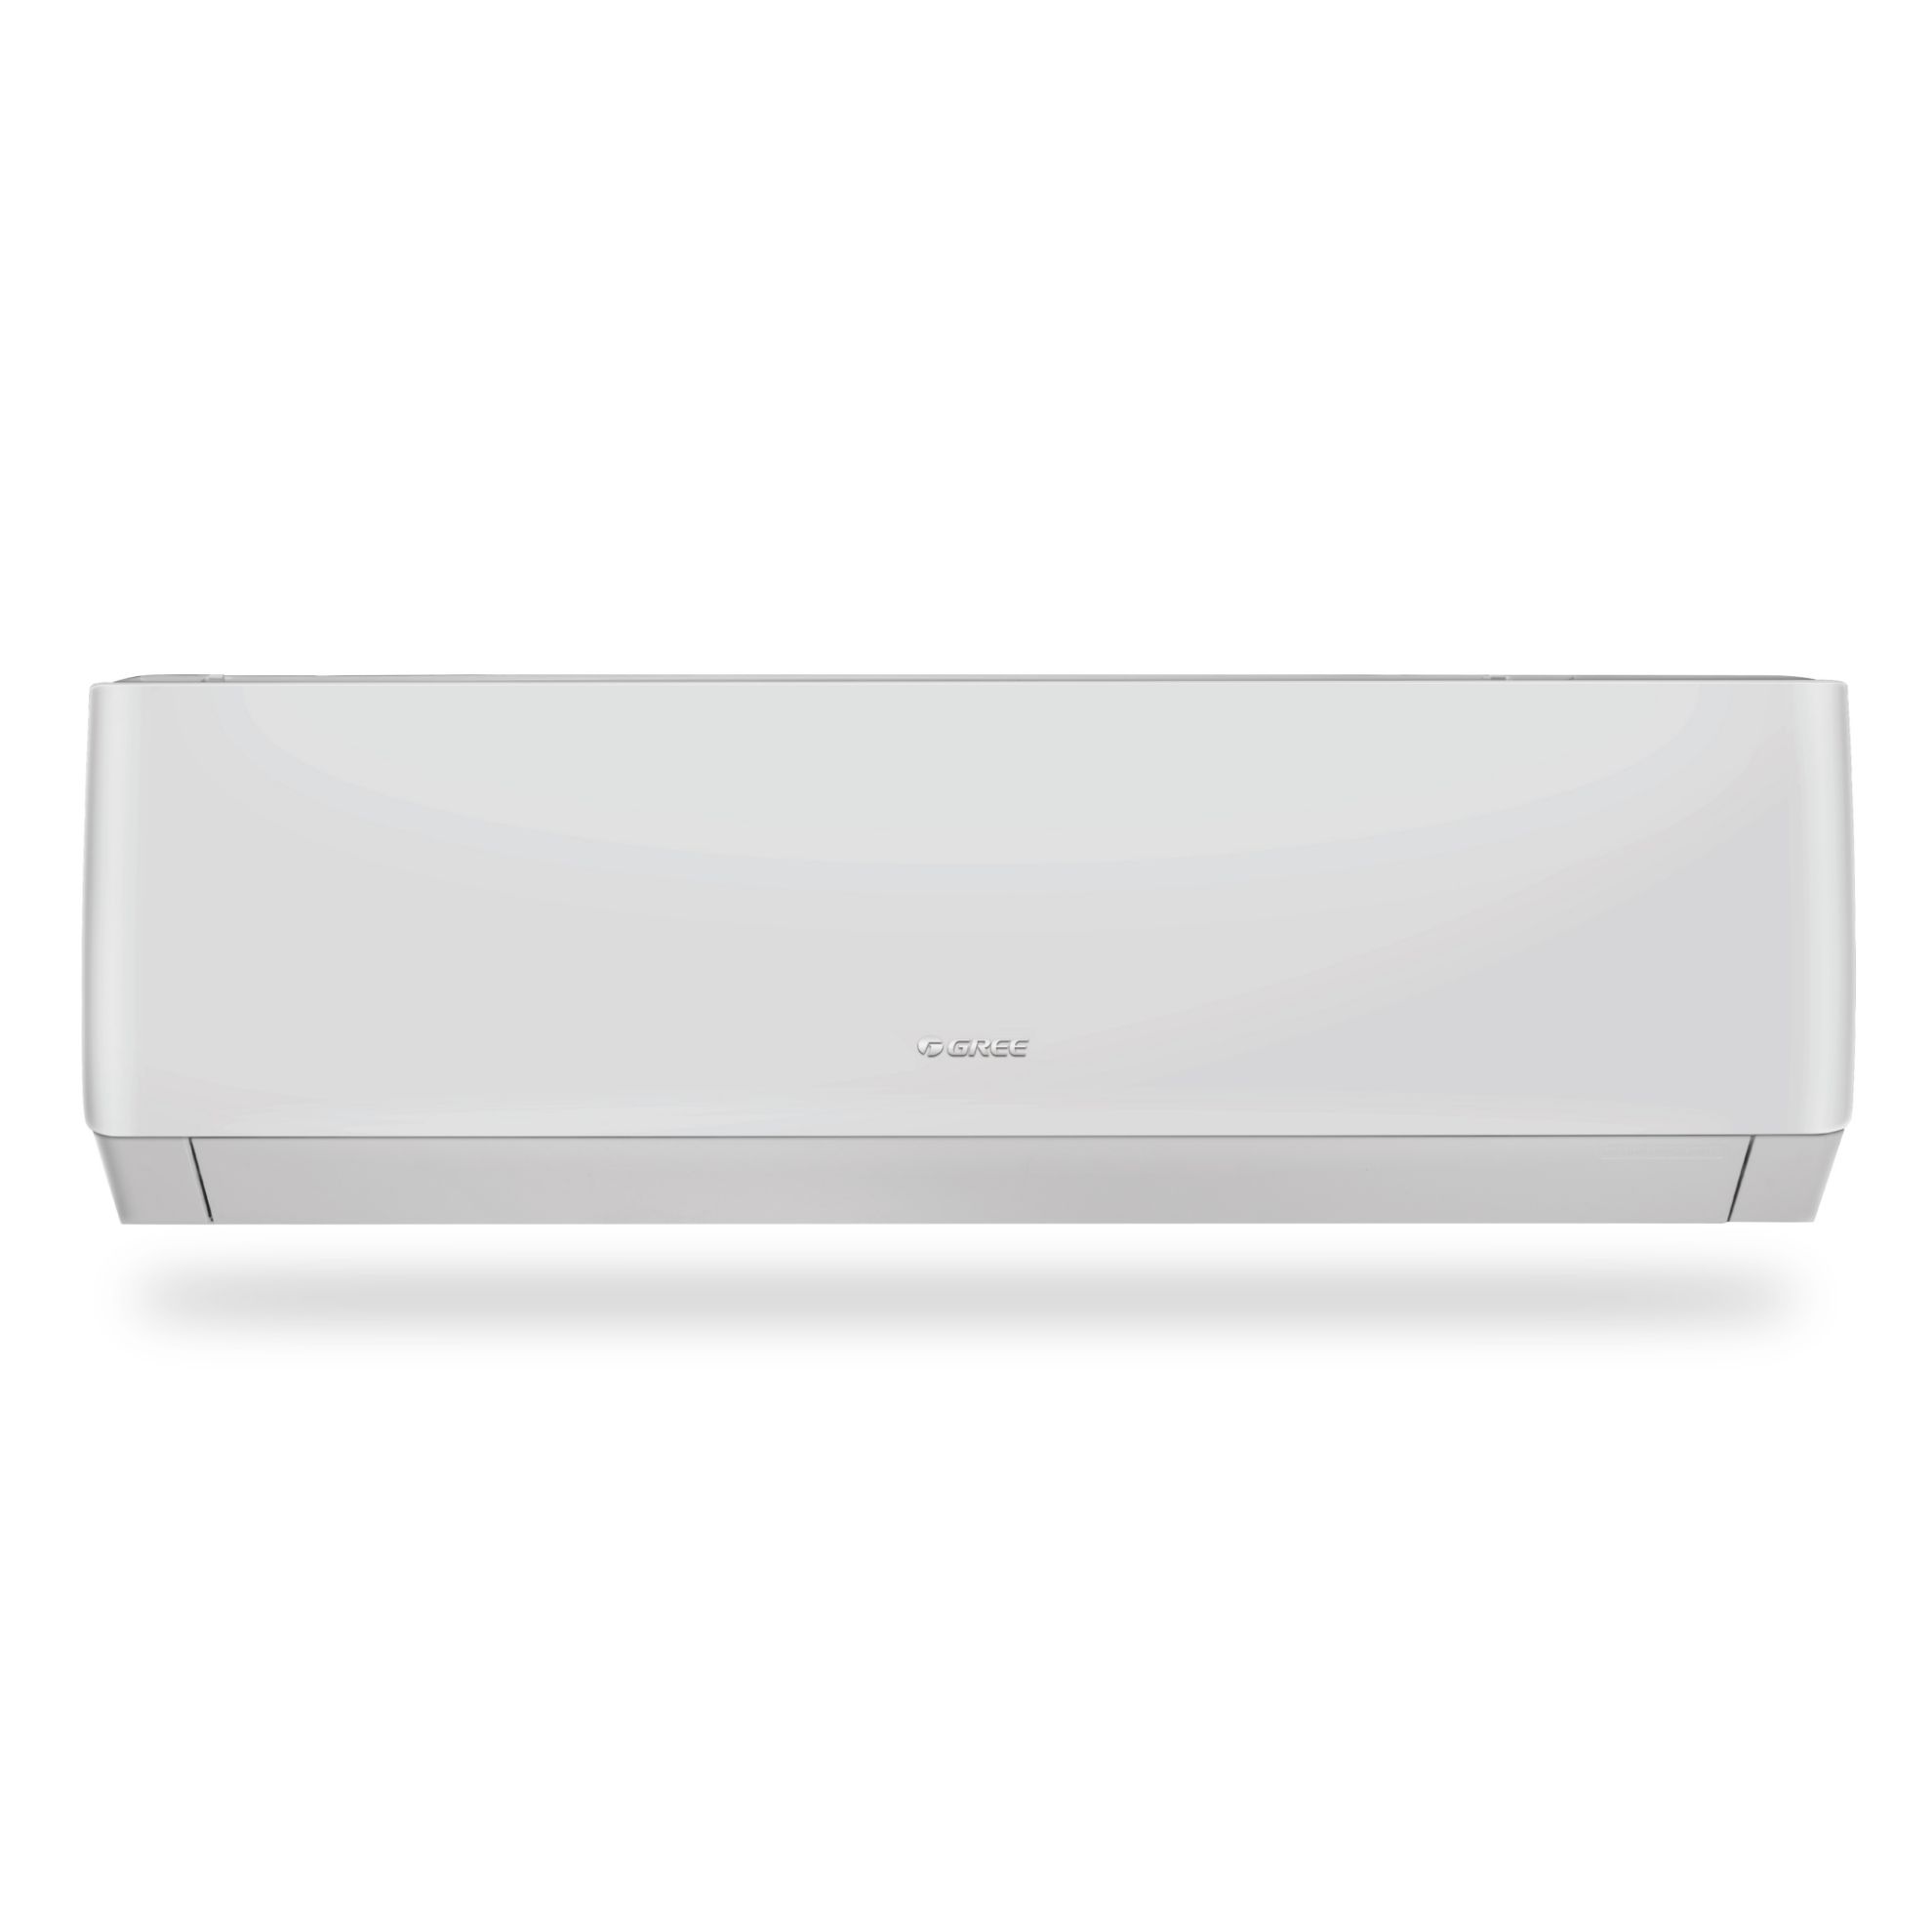 Picture of Gree - P4matic-P30C3 - 2.5 Ton|Rotary|Wall Split AC